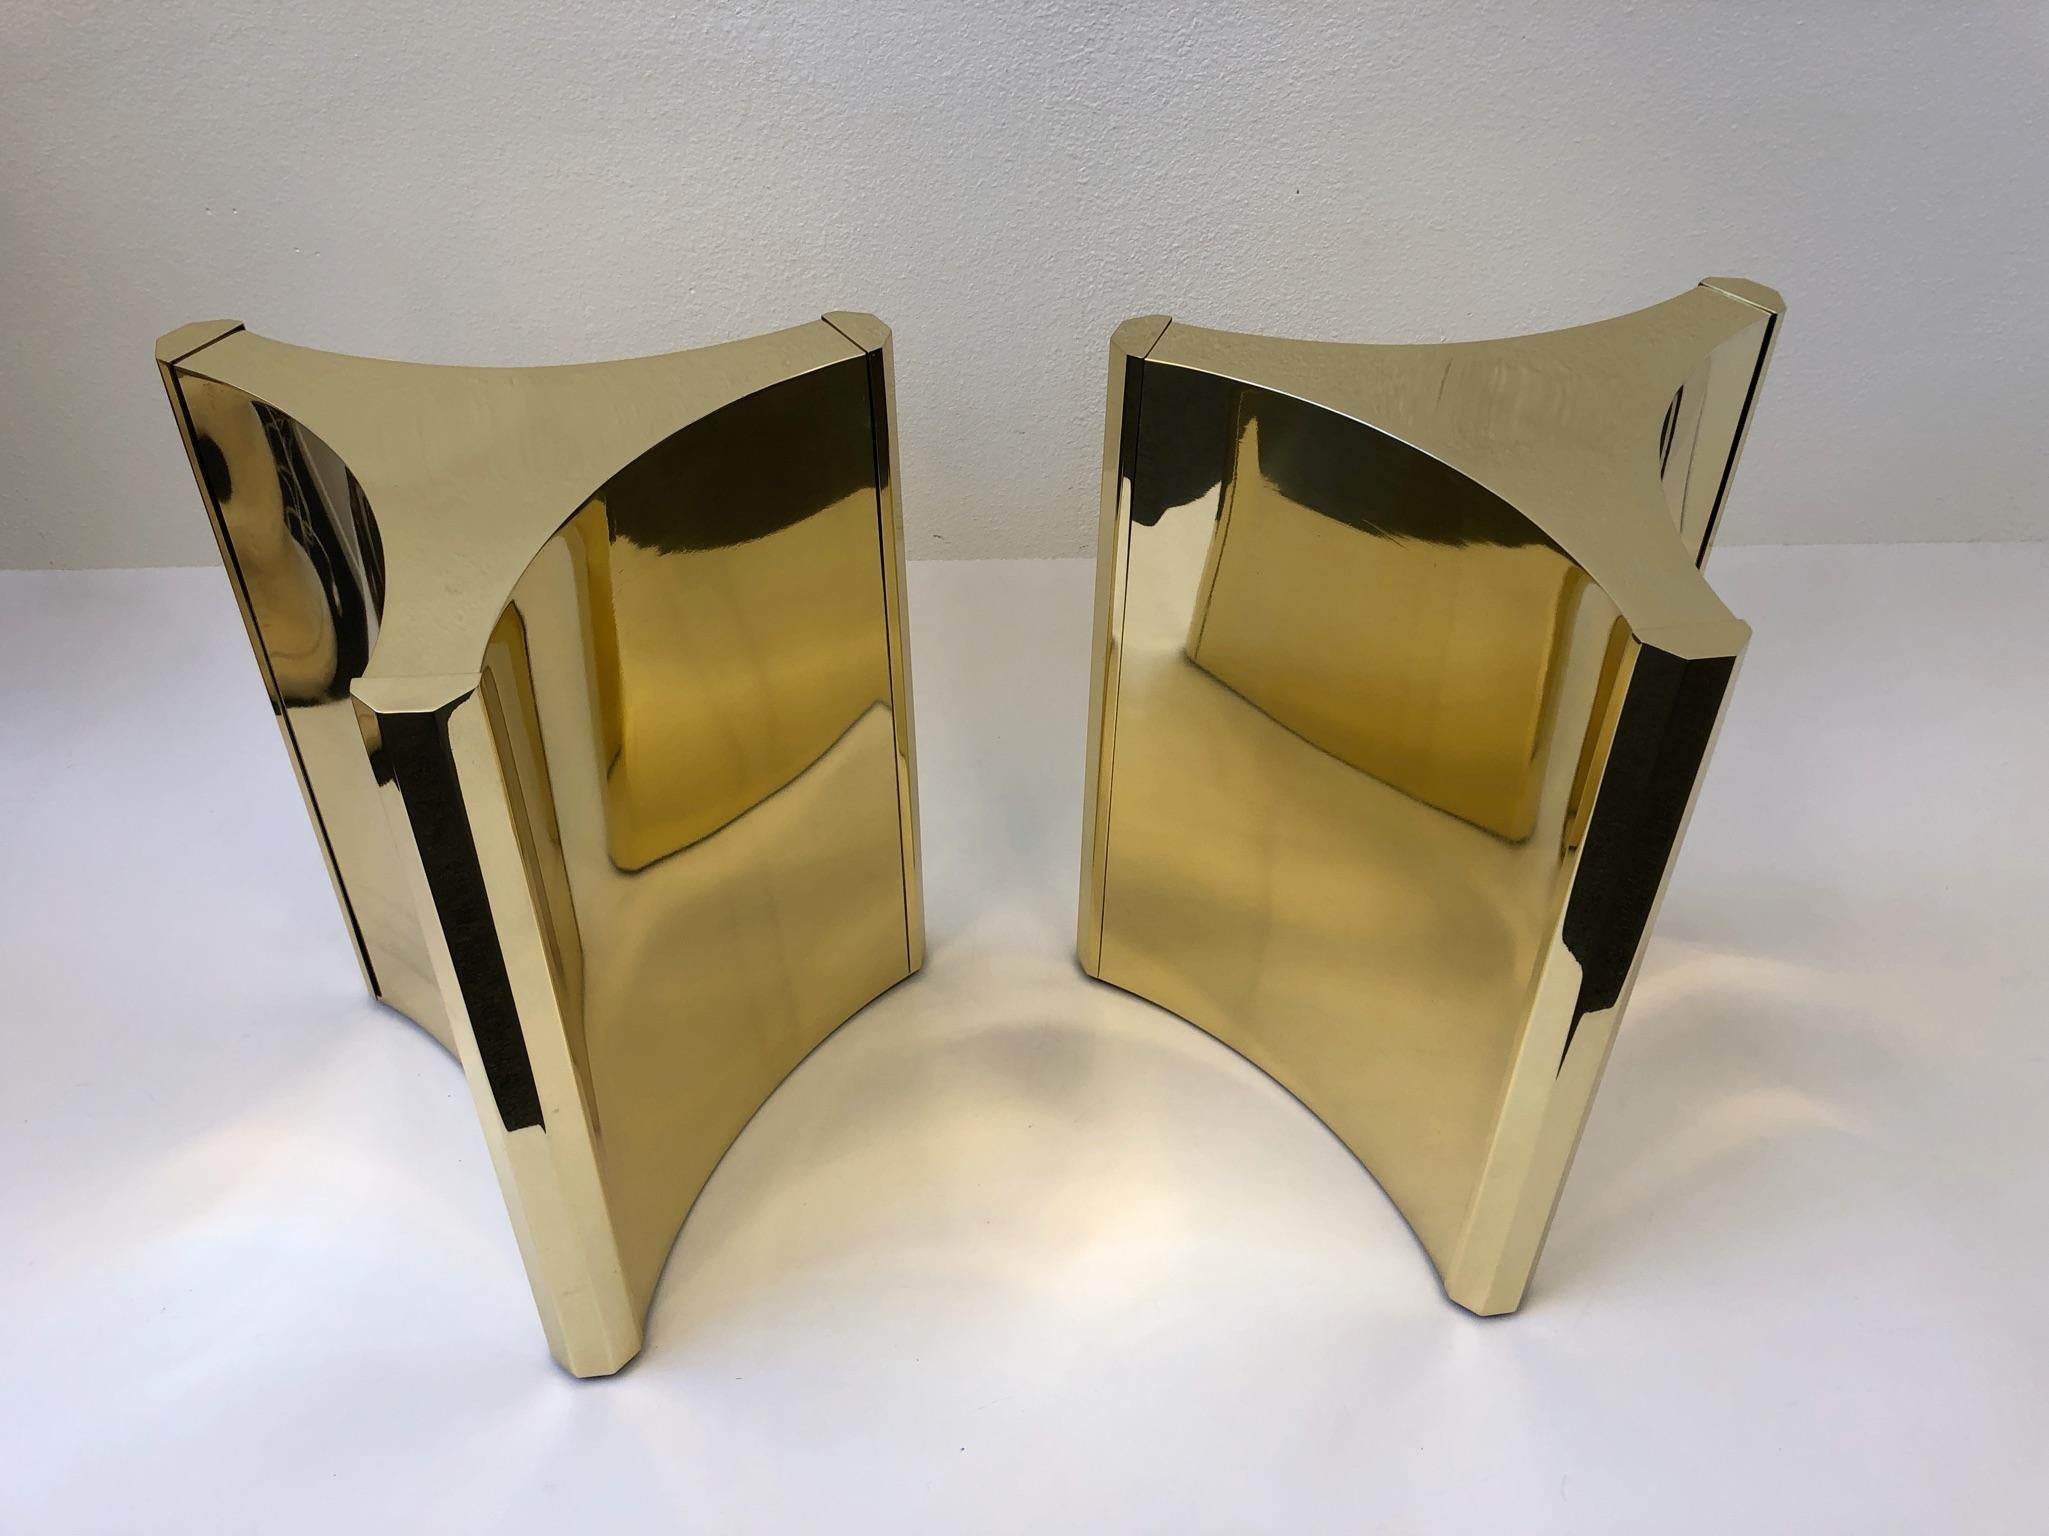 Late 20th Century Pair of Polished Brass Dining Table Bases by Mastercraft